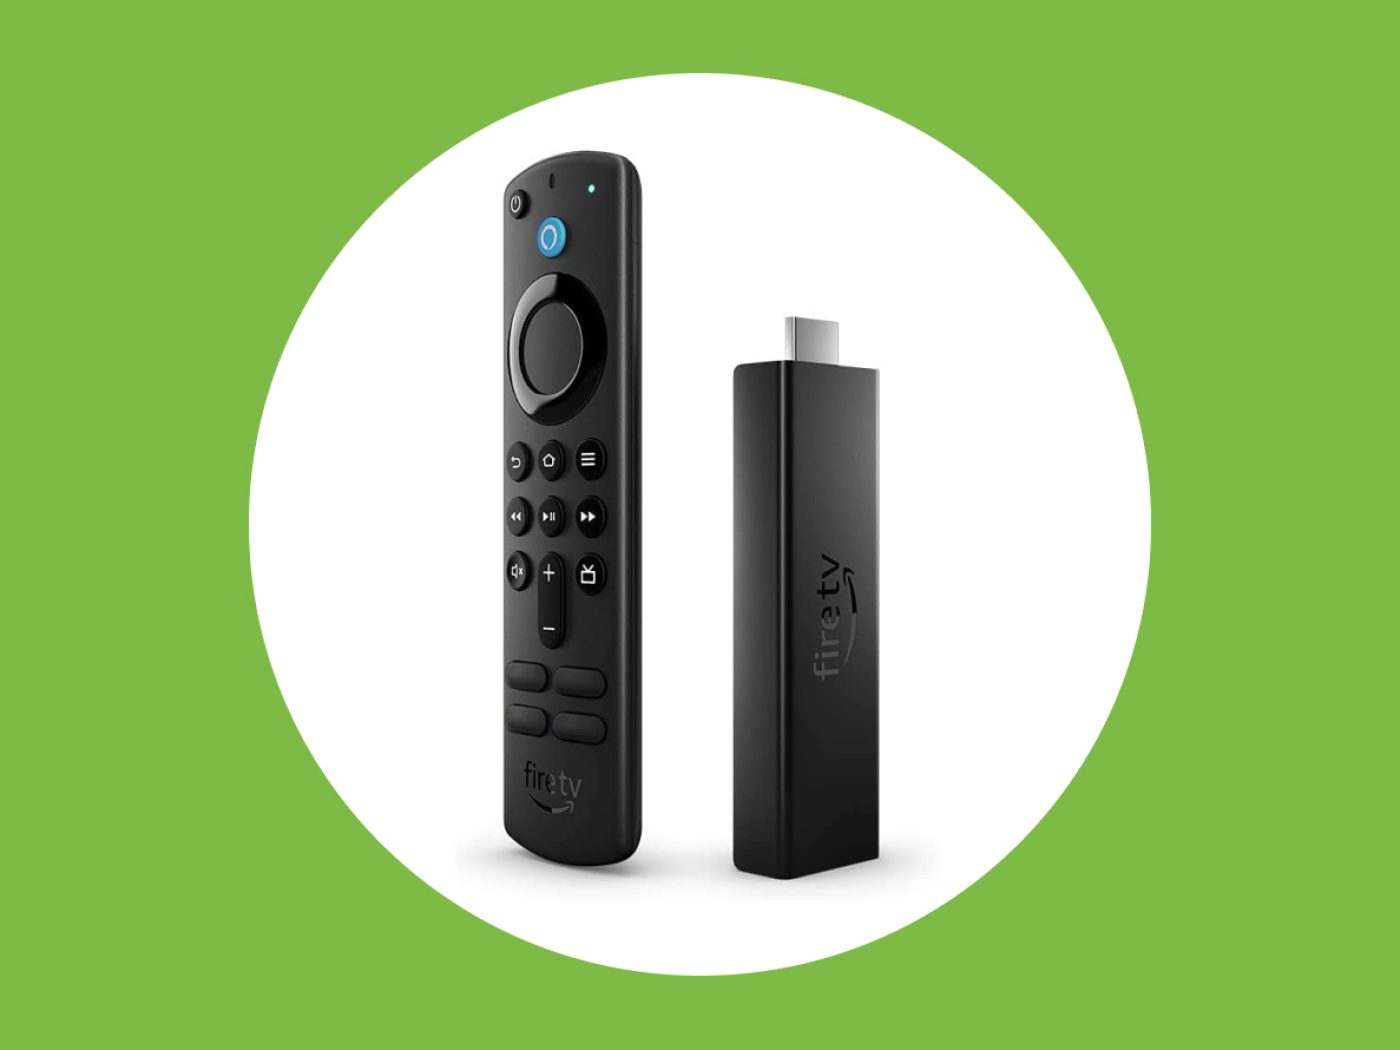 Fire TV Stick 4K Max to go on sale starting now: Price